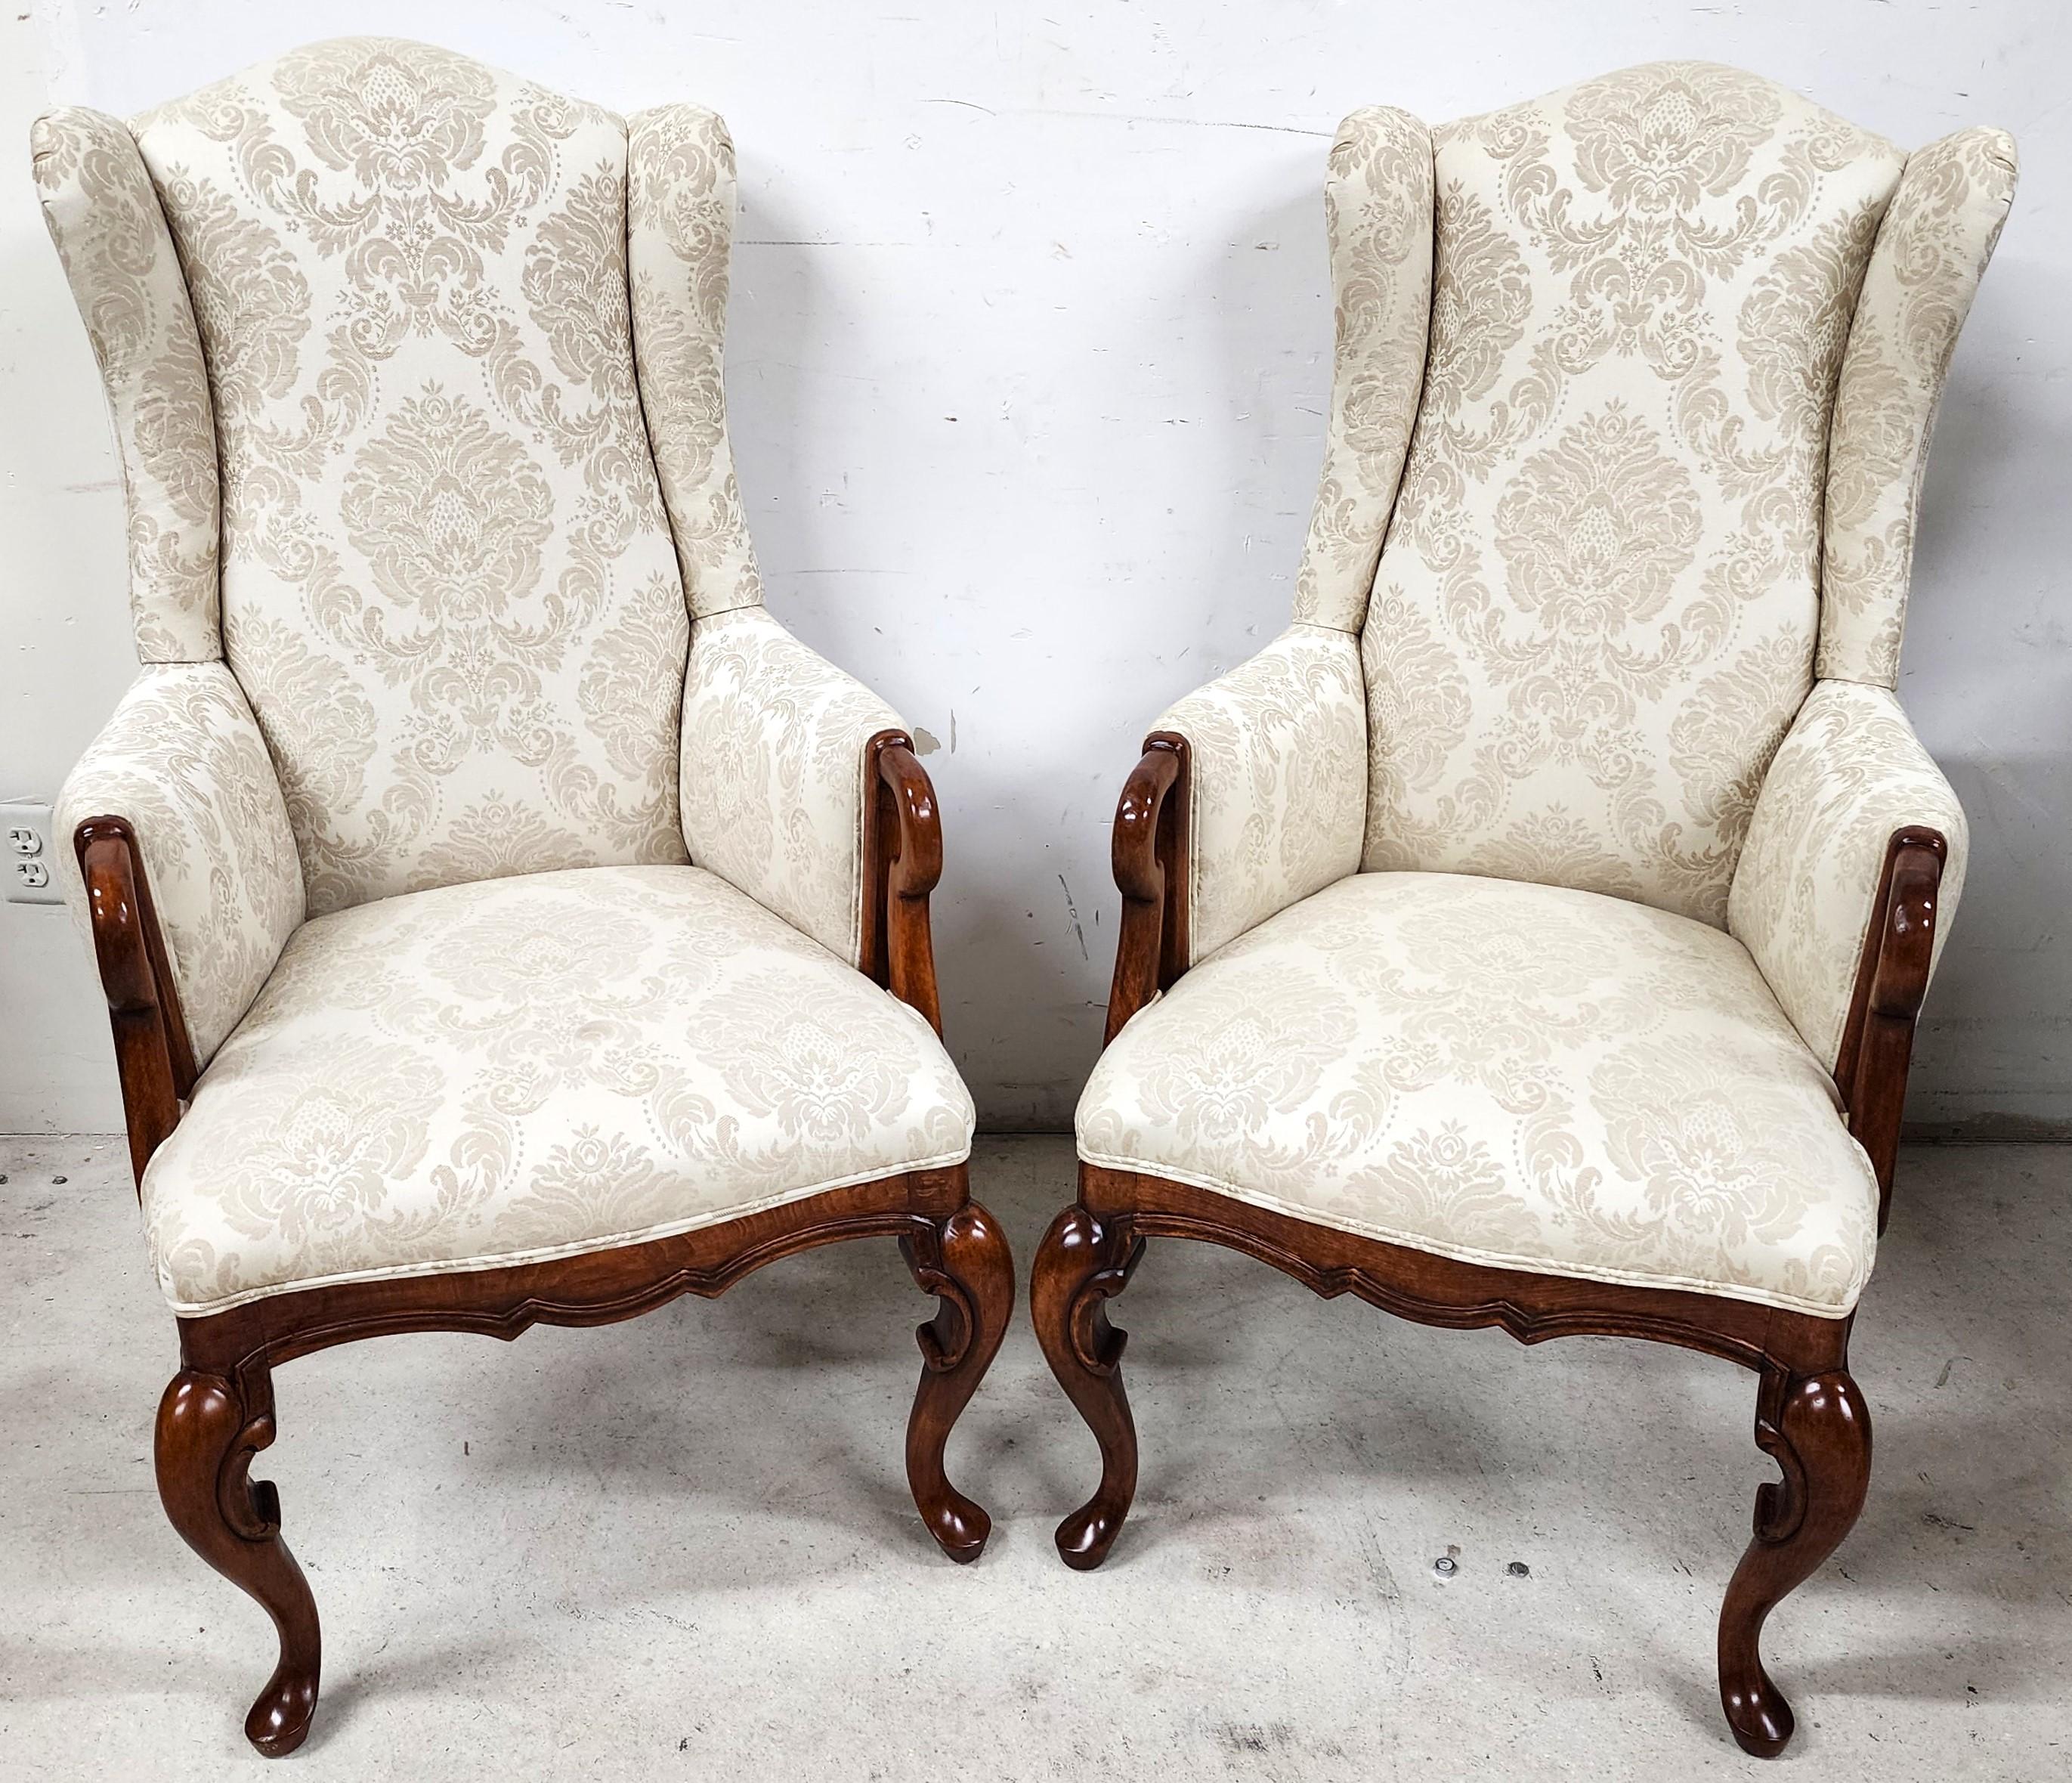 For FULL item description click on CONTINUE READING at the bottom of this page.

Offering One Of Our Recent Palm Beach Estate Fine Furniture Acquisitions Of A
Pair of Fabulous Chinese Chippendale Wingback Armchairs by BAU Furniture of